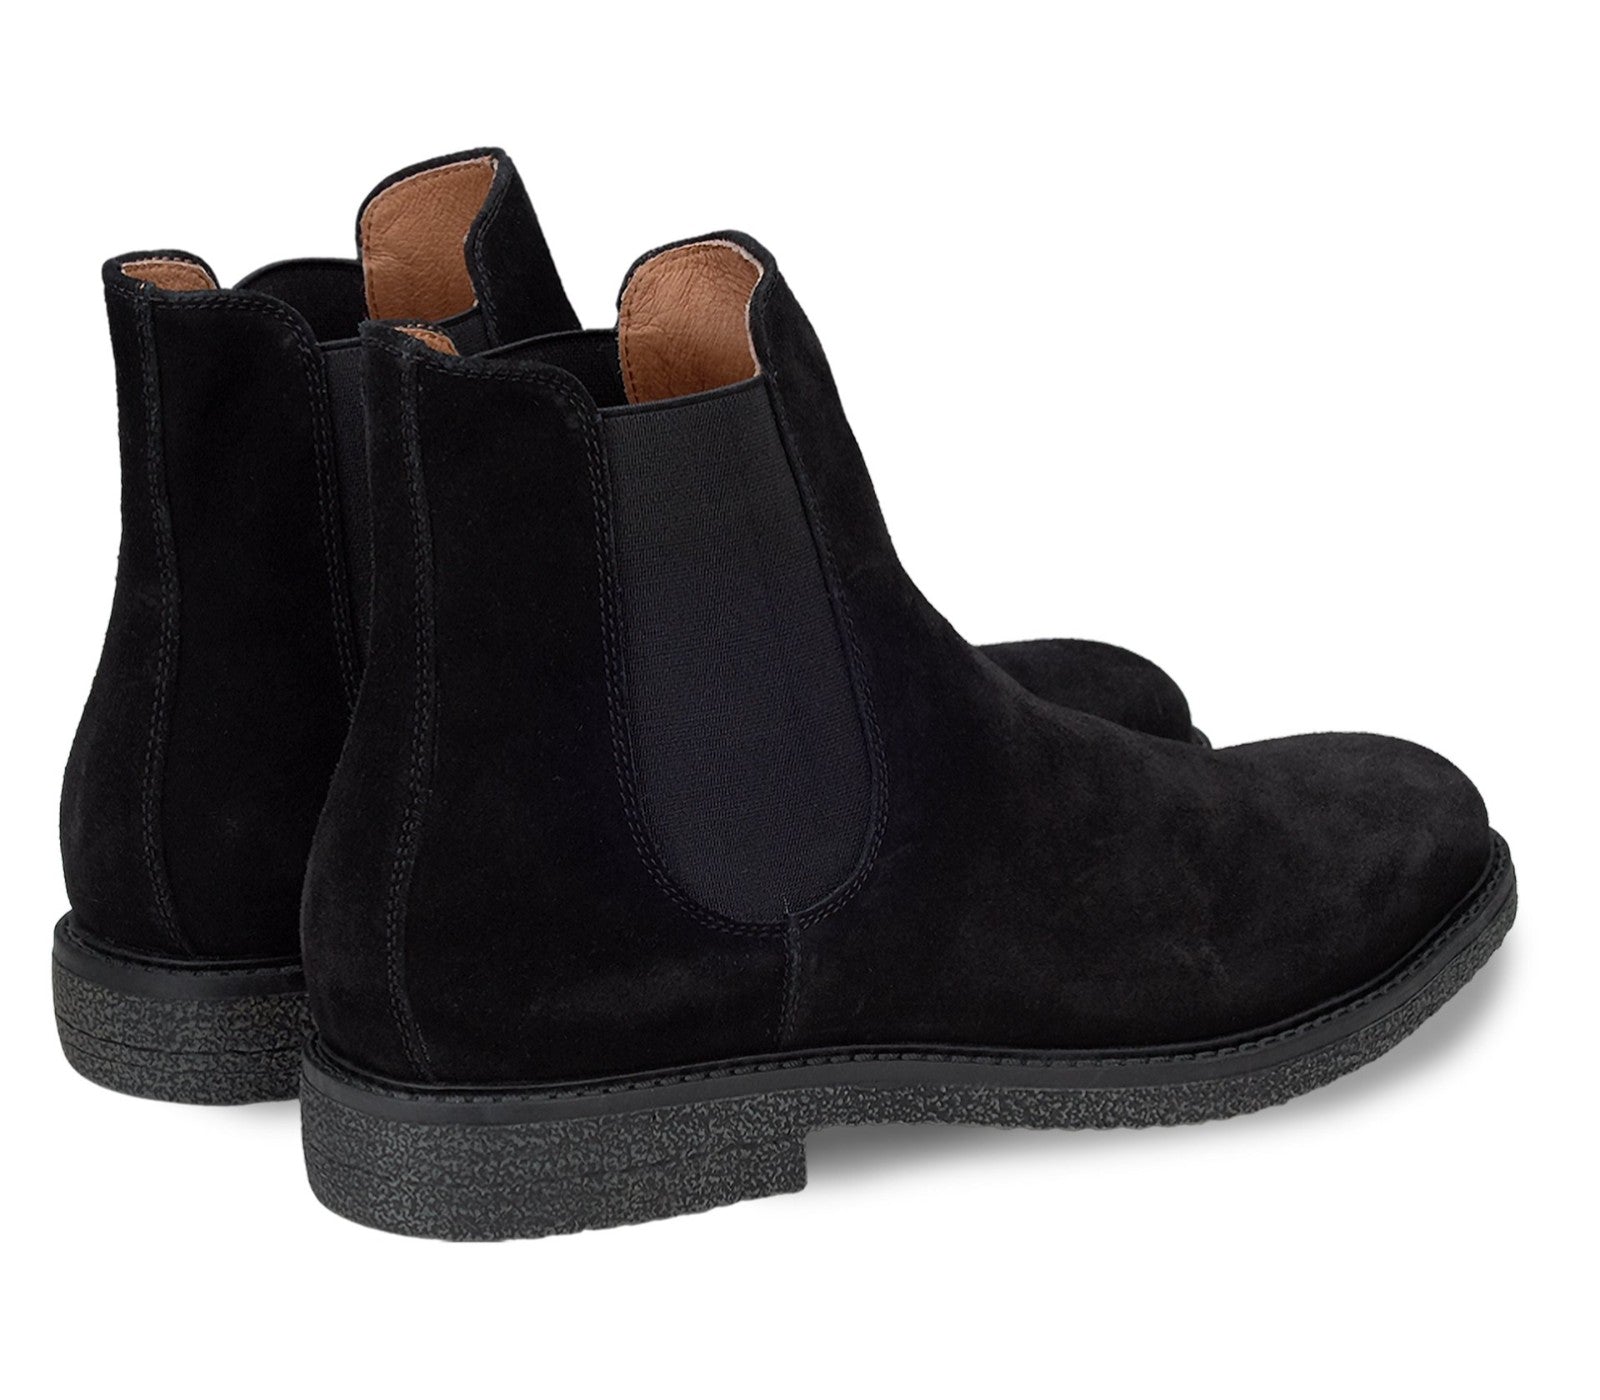 Men's Chelsea Boots in Black Suede with Elasticized Inserts